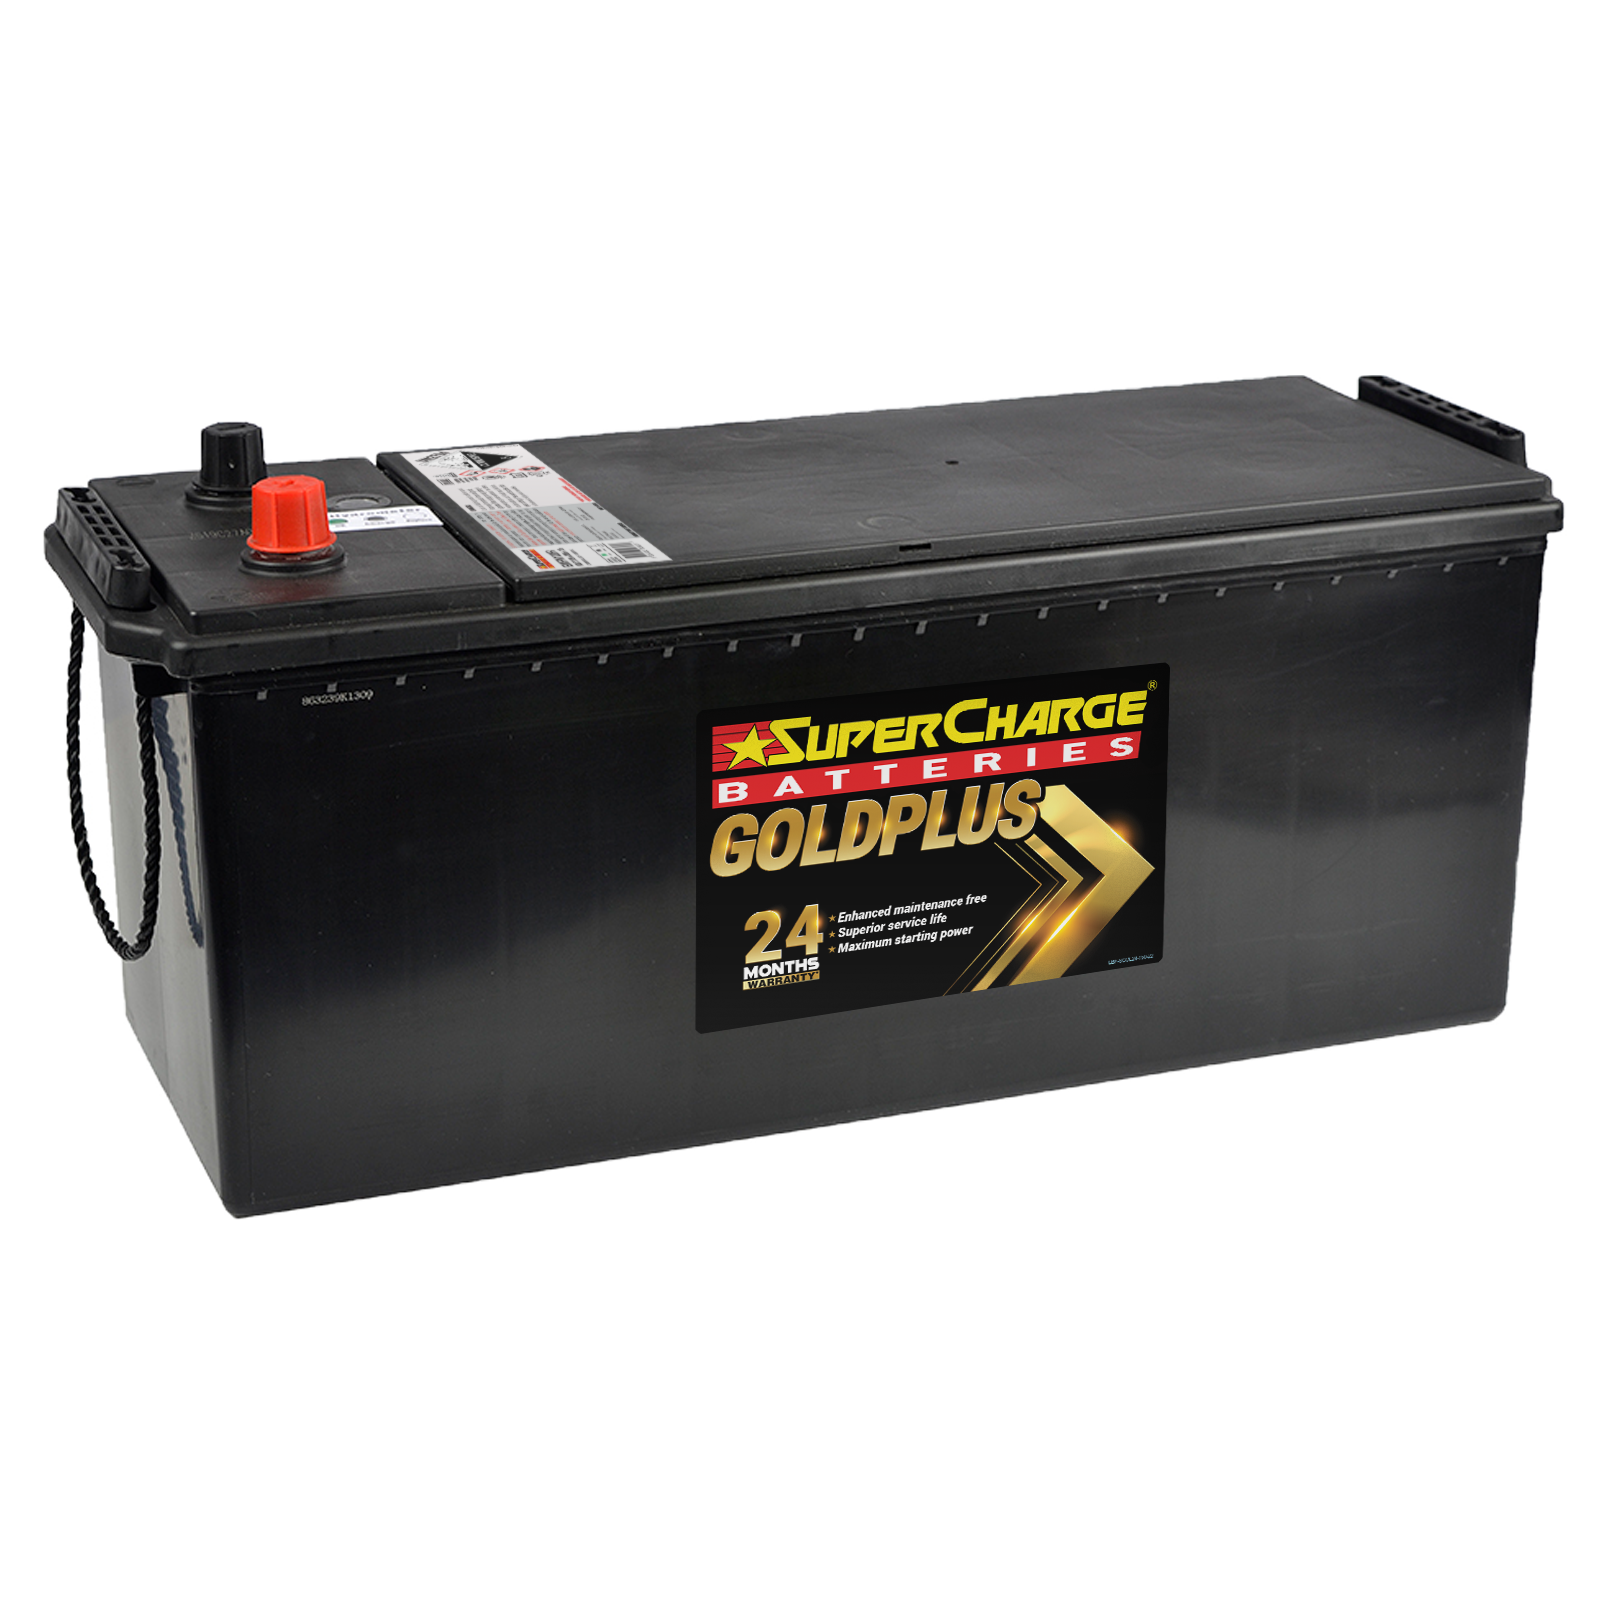 EMFN120R Battery - Reliable and Versatile | Shop Online